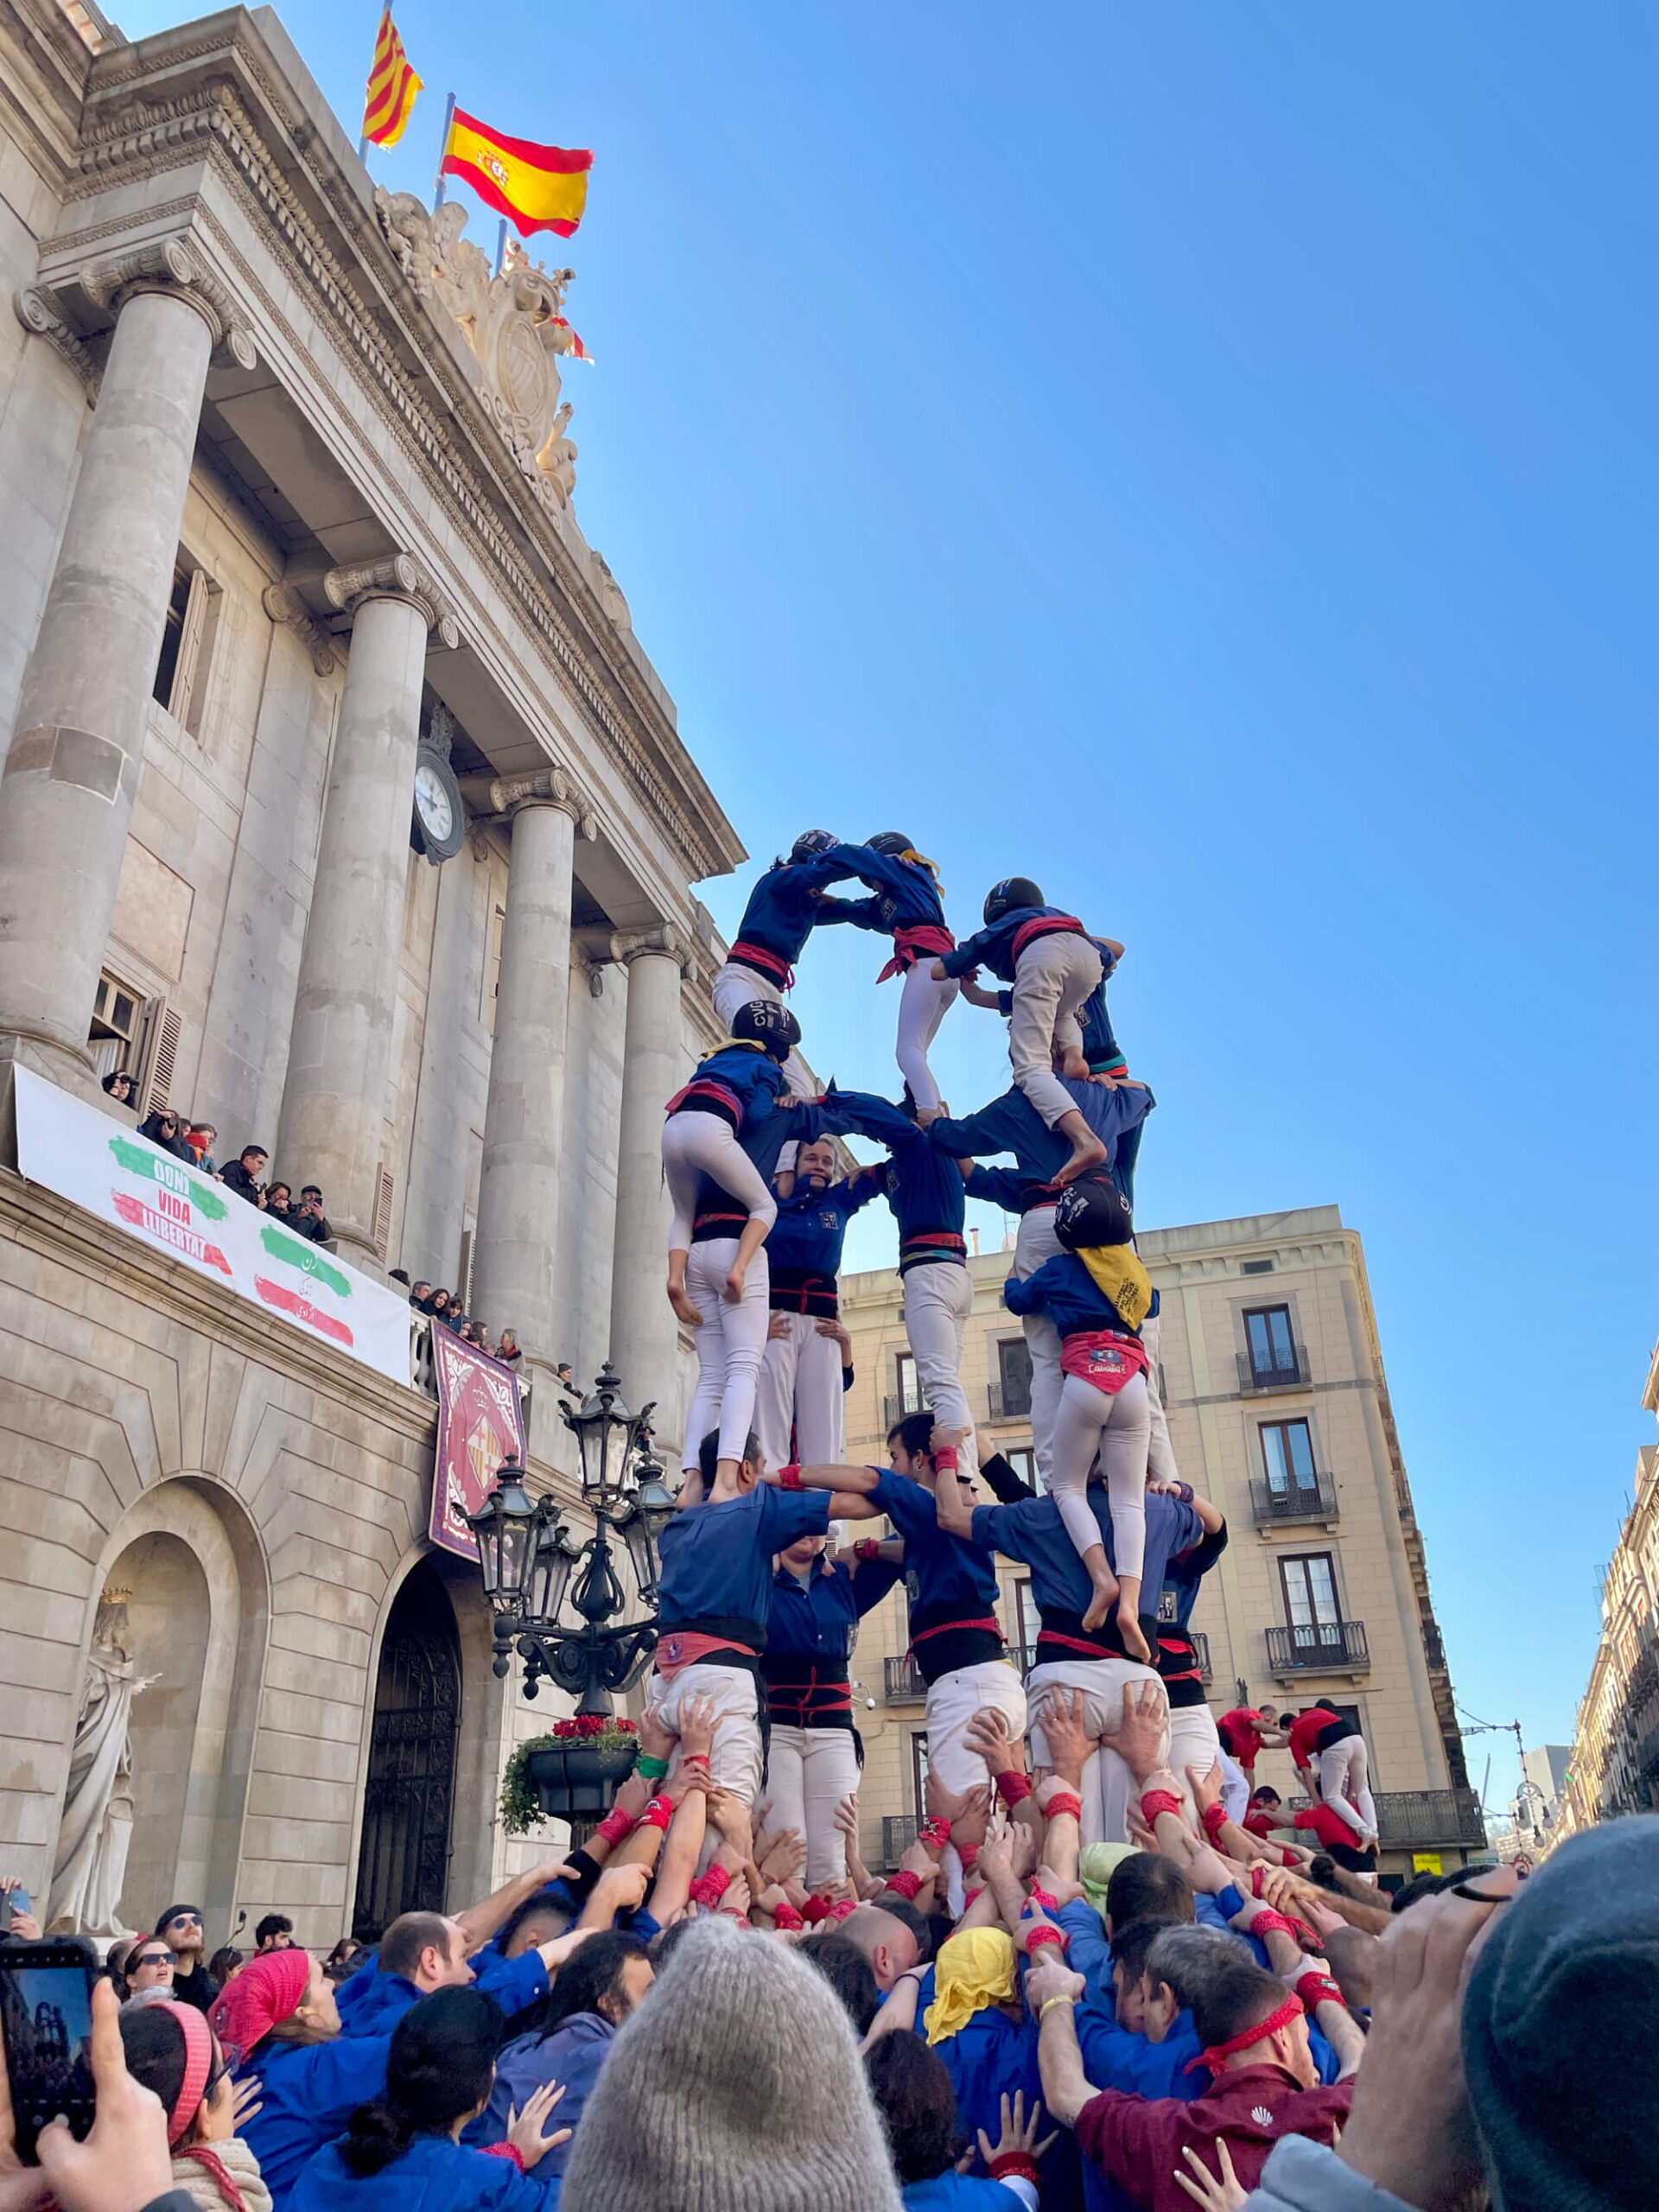 A human tower is formed by a group of people, standing in front of a historic building with columns. Flags are seen atop the building. The base of the tower is wide, gradually narrowing as it reaches the top, with several tiers of participants. Onlookers are gathered around.